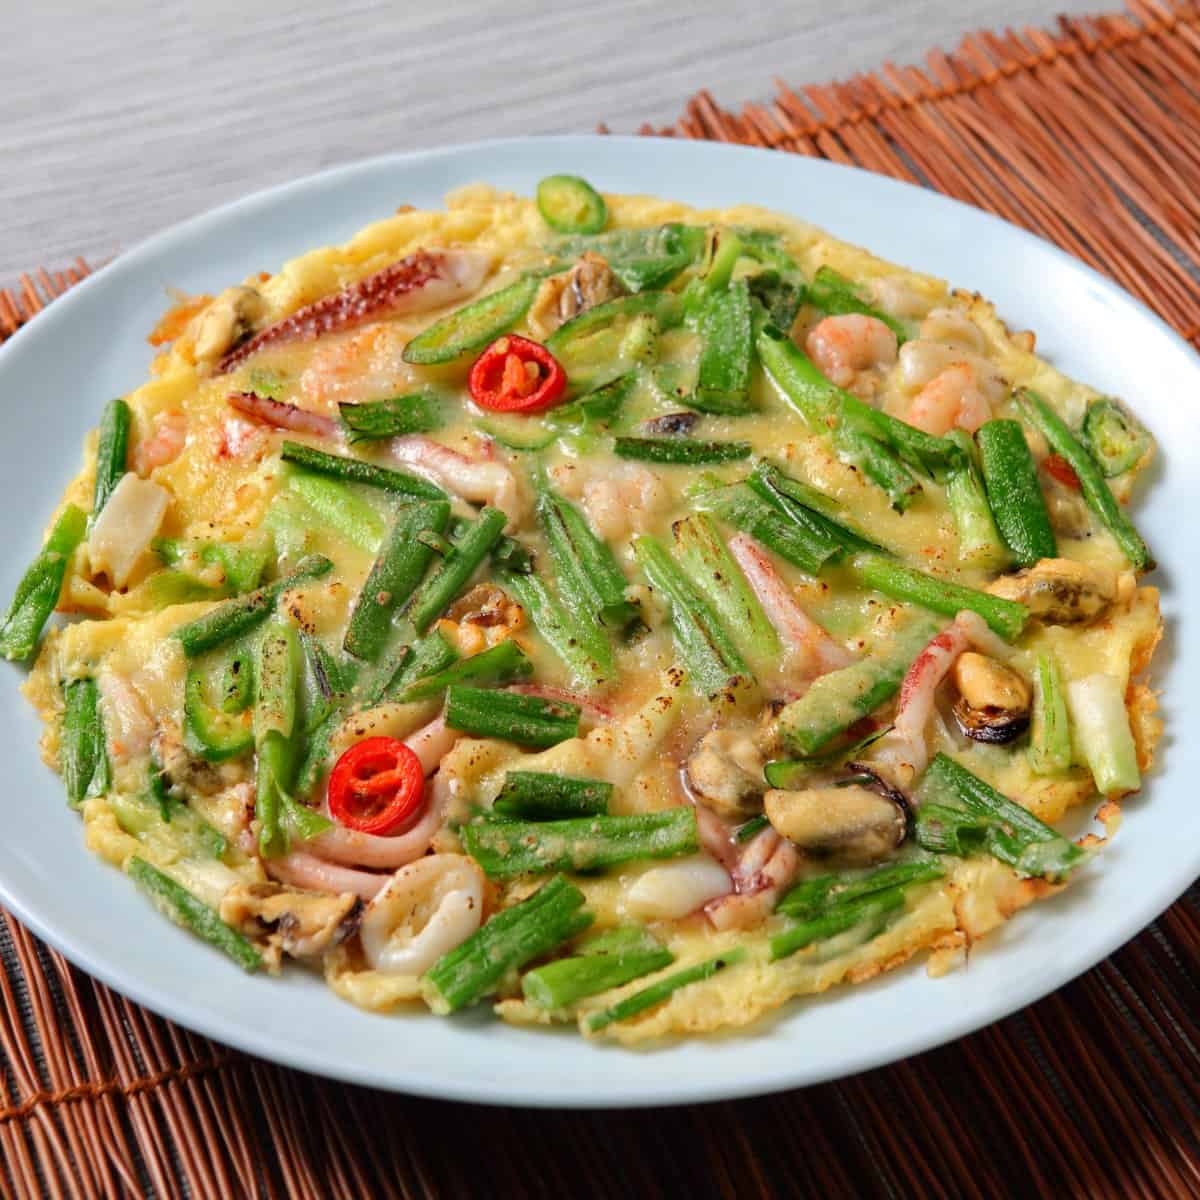 What is pajeon